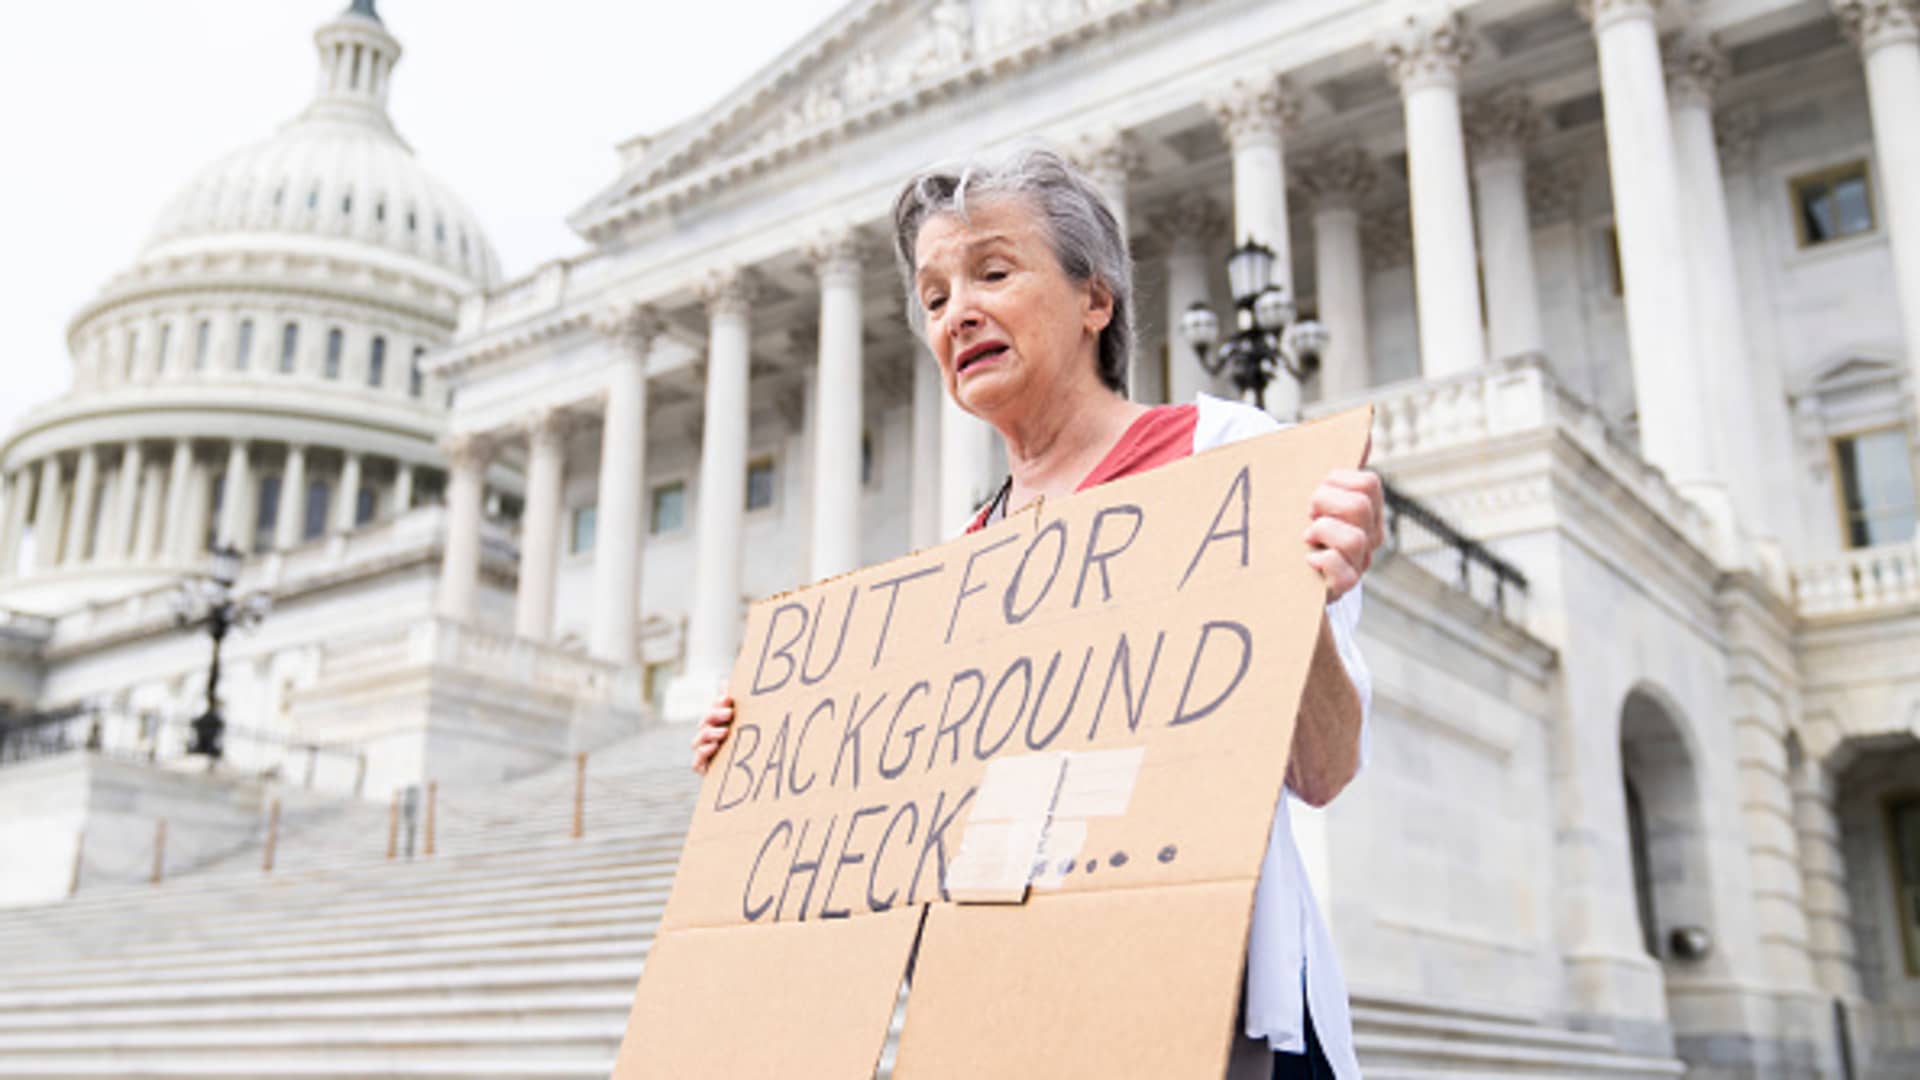 Marnie Beale of Arlington, Va., holds a sign at the Senate steps of the U.S. Capitol calling for background checks on gun purchases on Wednesday, May 25, 2022, after the latest mass shooting at a Texas elementary school.